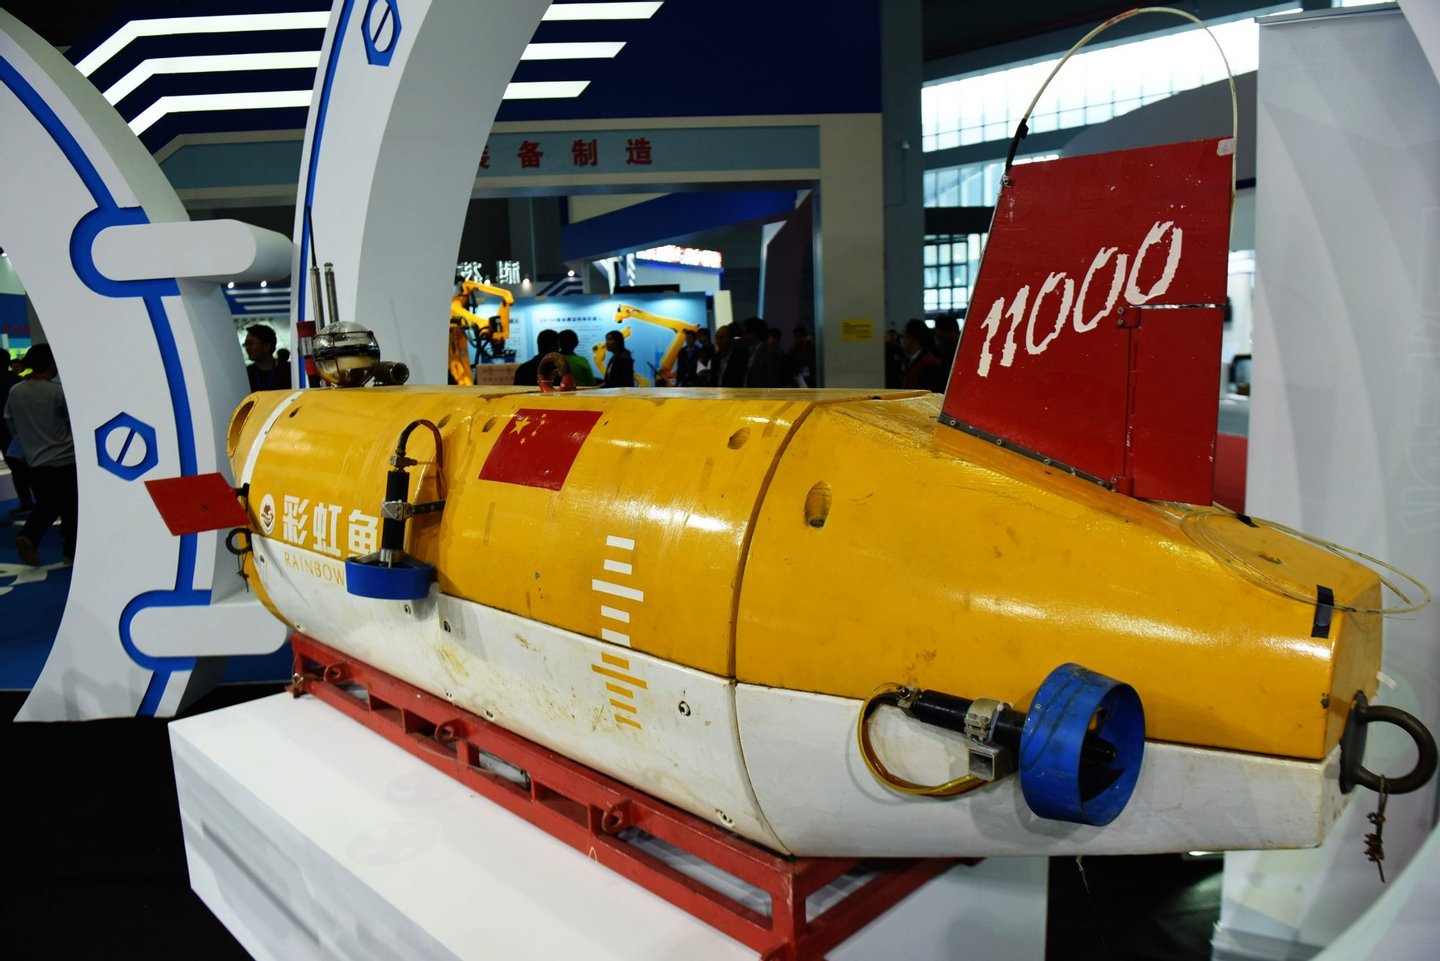 SHANGHAI, CHINA - NOVEMBER 03: (CHINA OUT) China's first 11,000-meter manned submersible "Rainbow Fish" is displayed at the 17th China International Industry Fair at National Exhibition and Convention Center on November 3, 2015 in Shanghai, China. The 17th China International Industry Fair will open on Nov 3-7 at National Exhibition and Convention Center in Shanghai. (Photo by VCG/VCG via Getty Images)